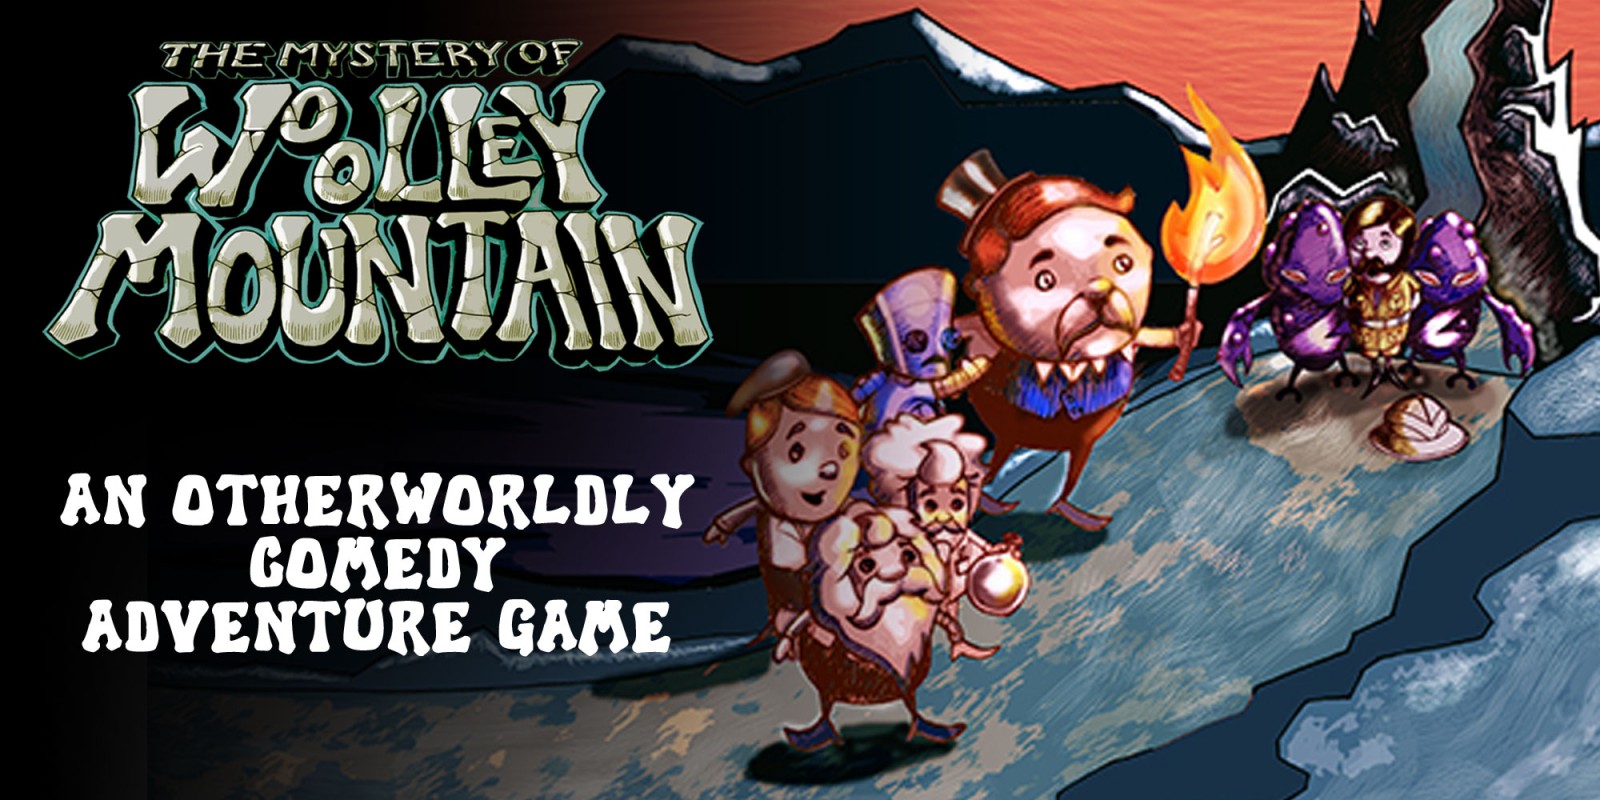 the-mystery-of-woolley-mountain-nintendo-switch-download-software-games-nintendo